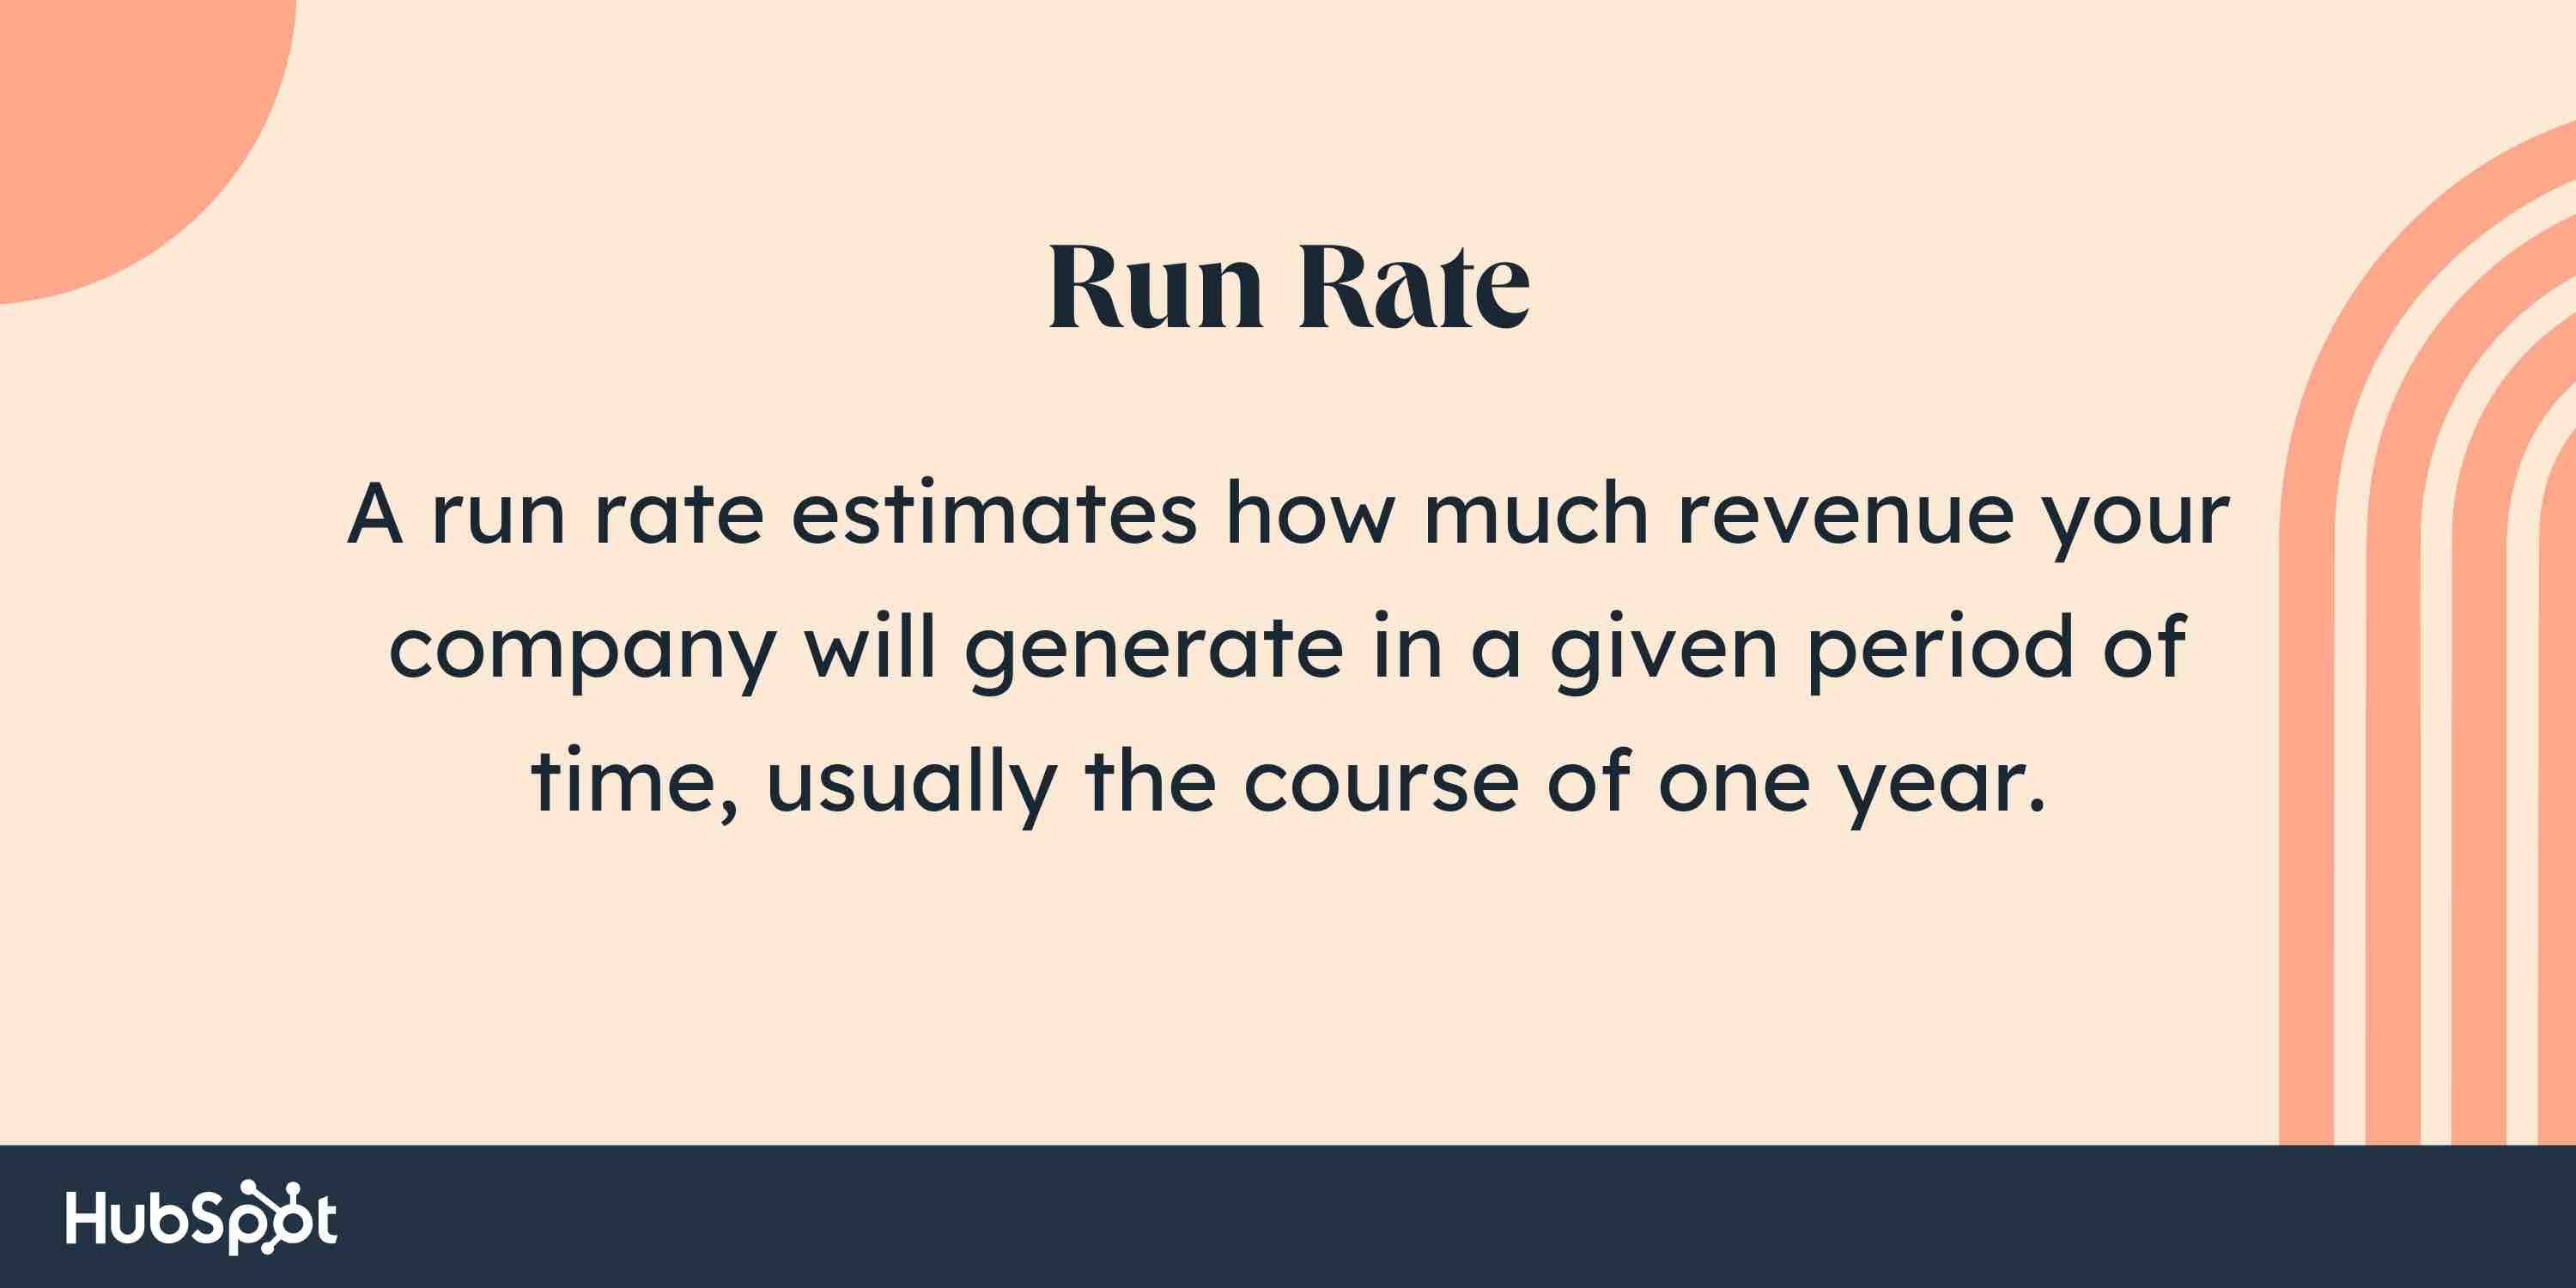 hat is run rate, a run rate estimates how much revenue your company will generate in a given period of time.